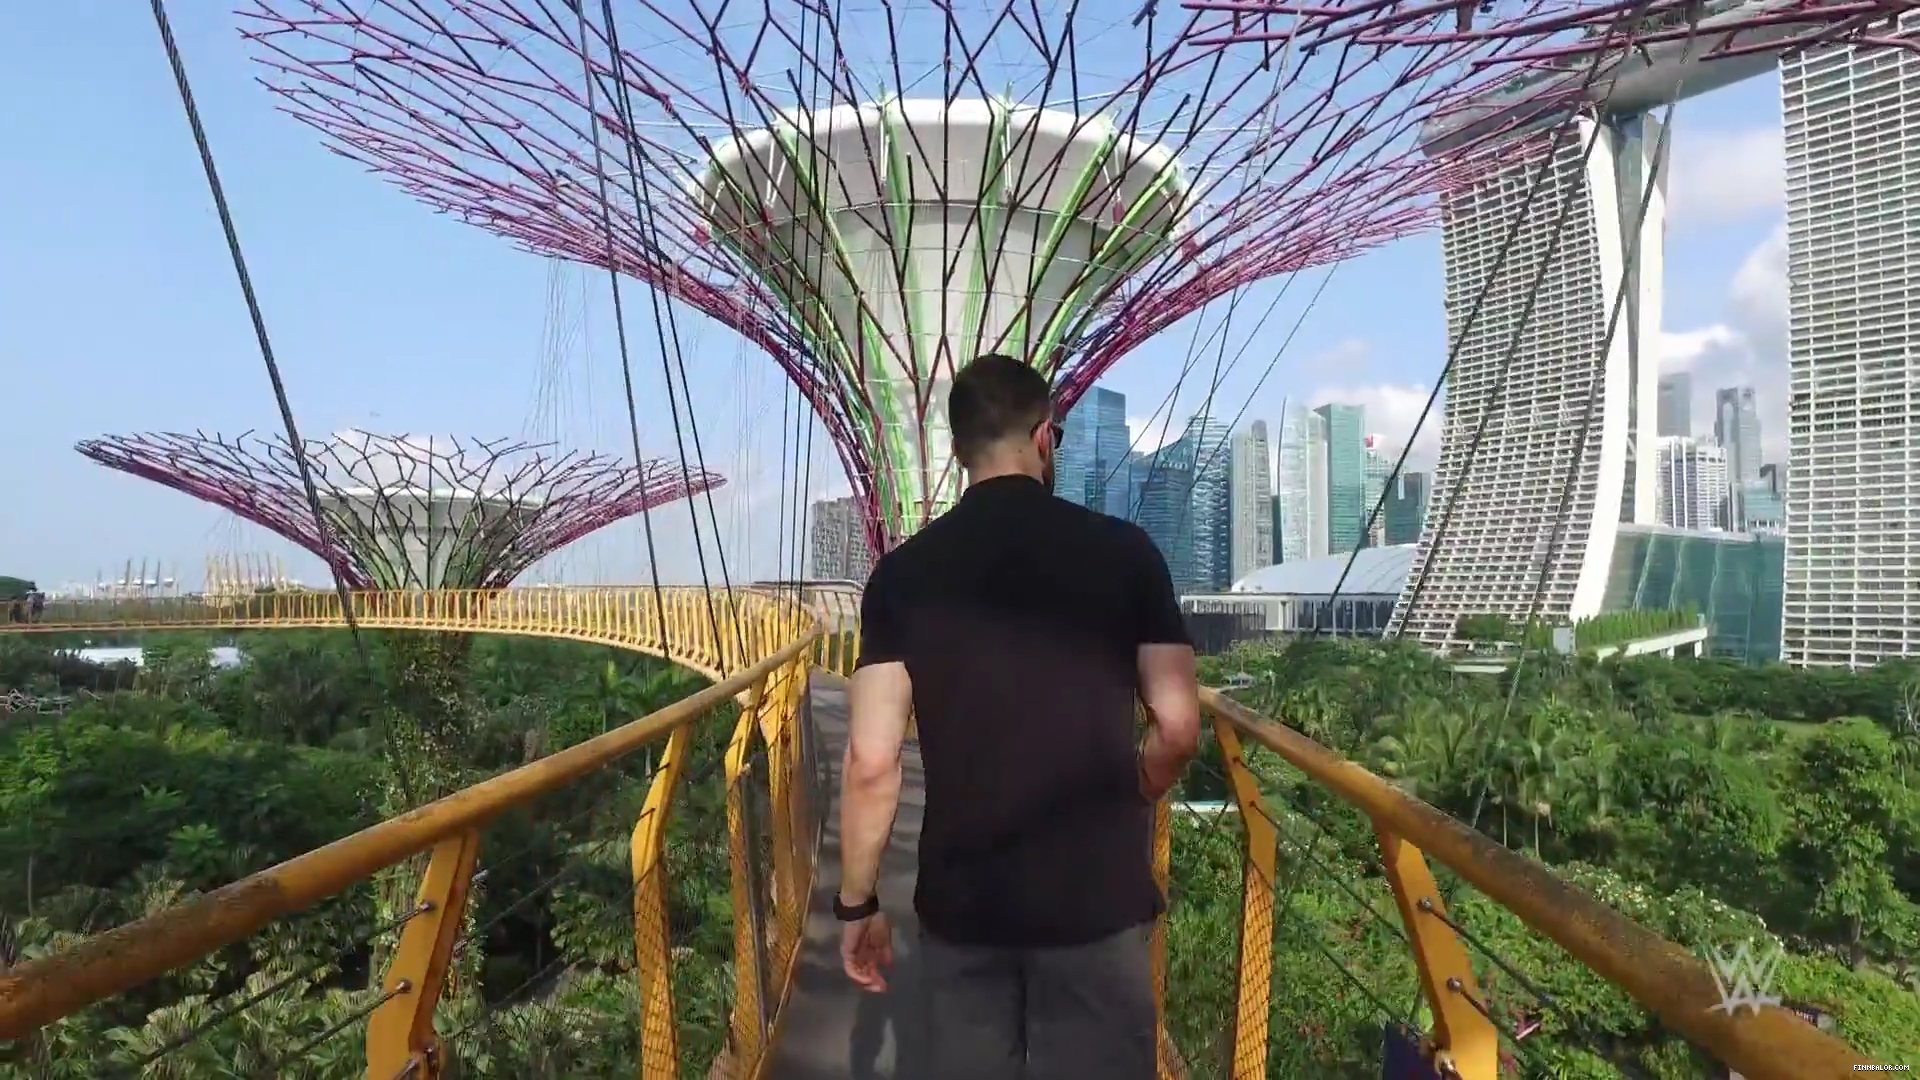 Finn_Balor_feels_like_he_is_in__Star_Wars__while_touring_Singapore_s_Supertree__mp40011.jpg